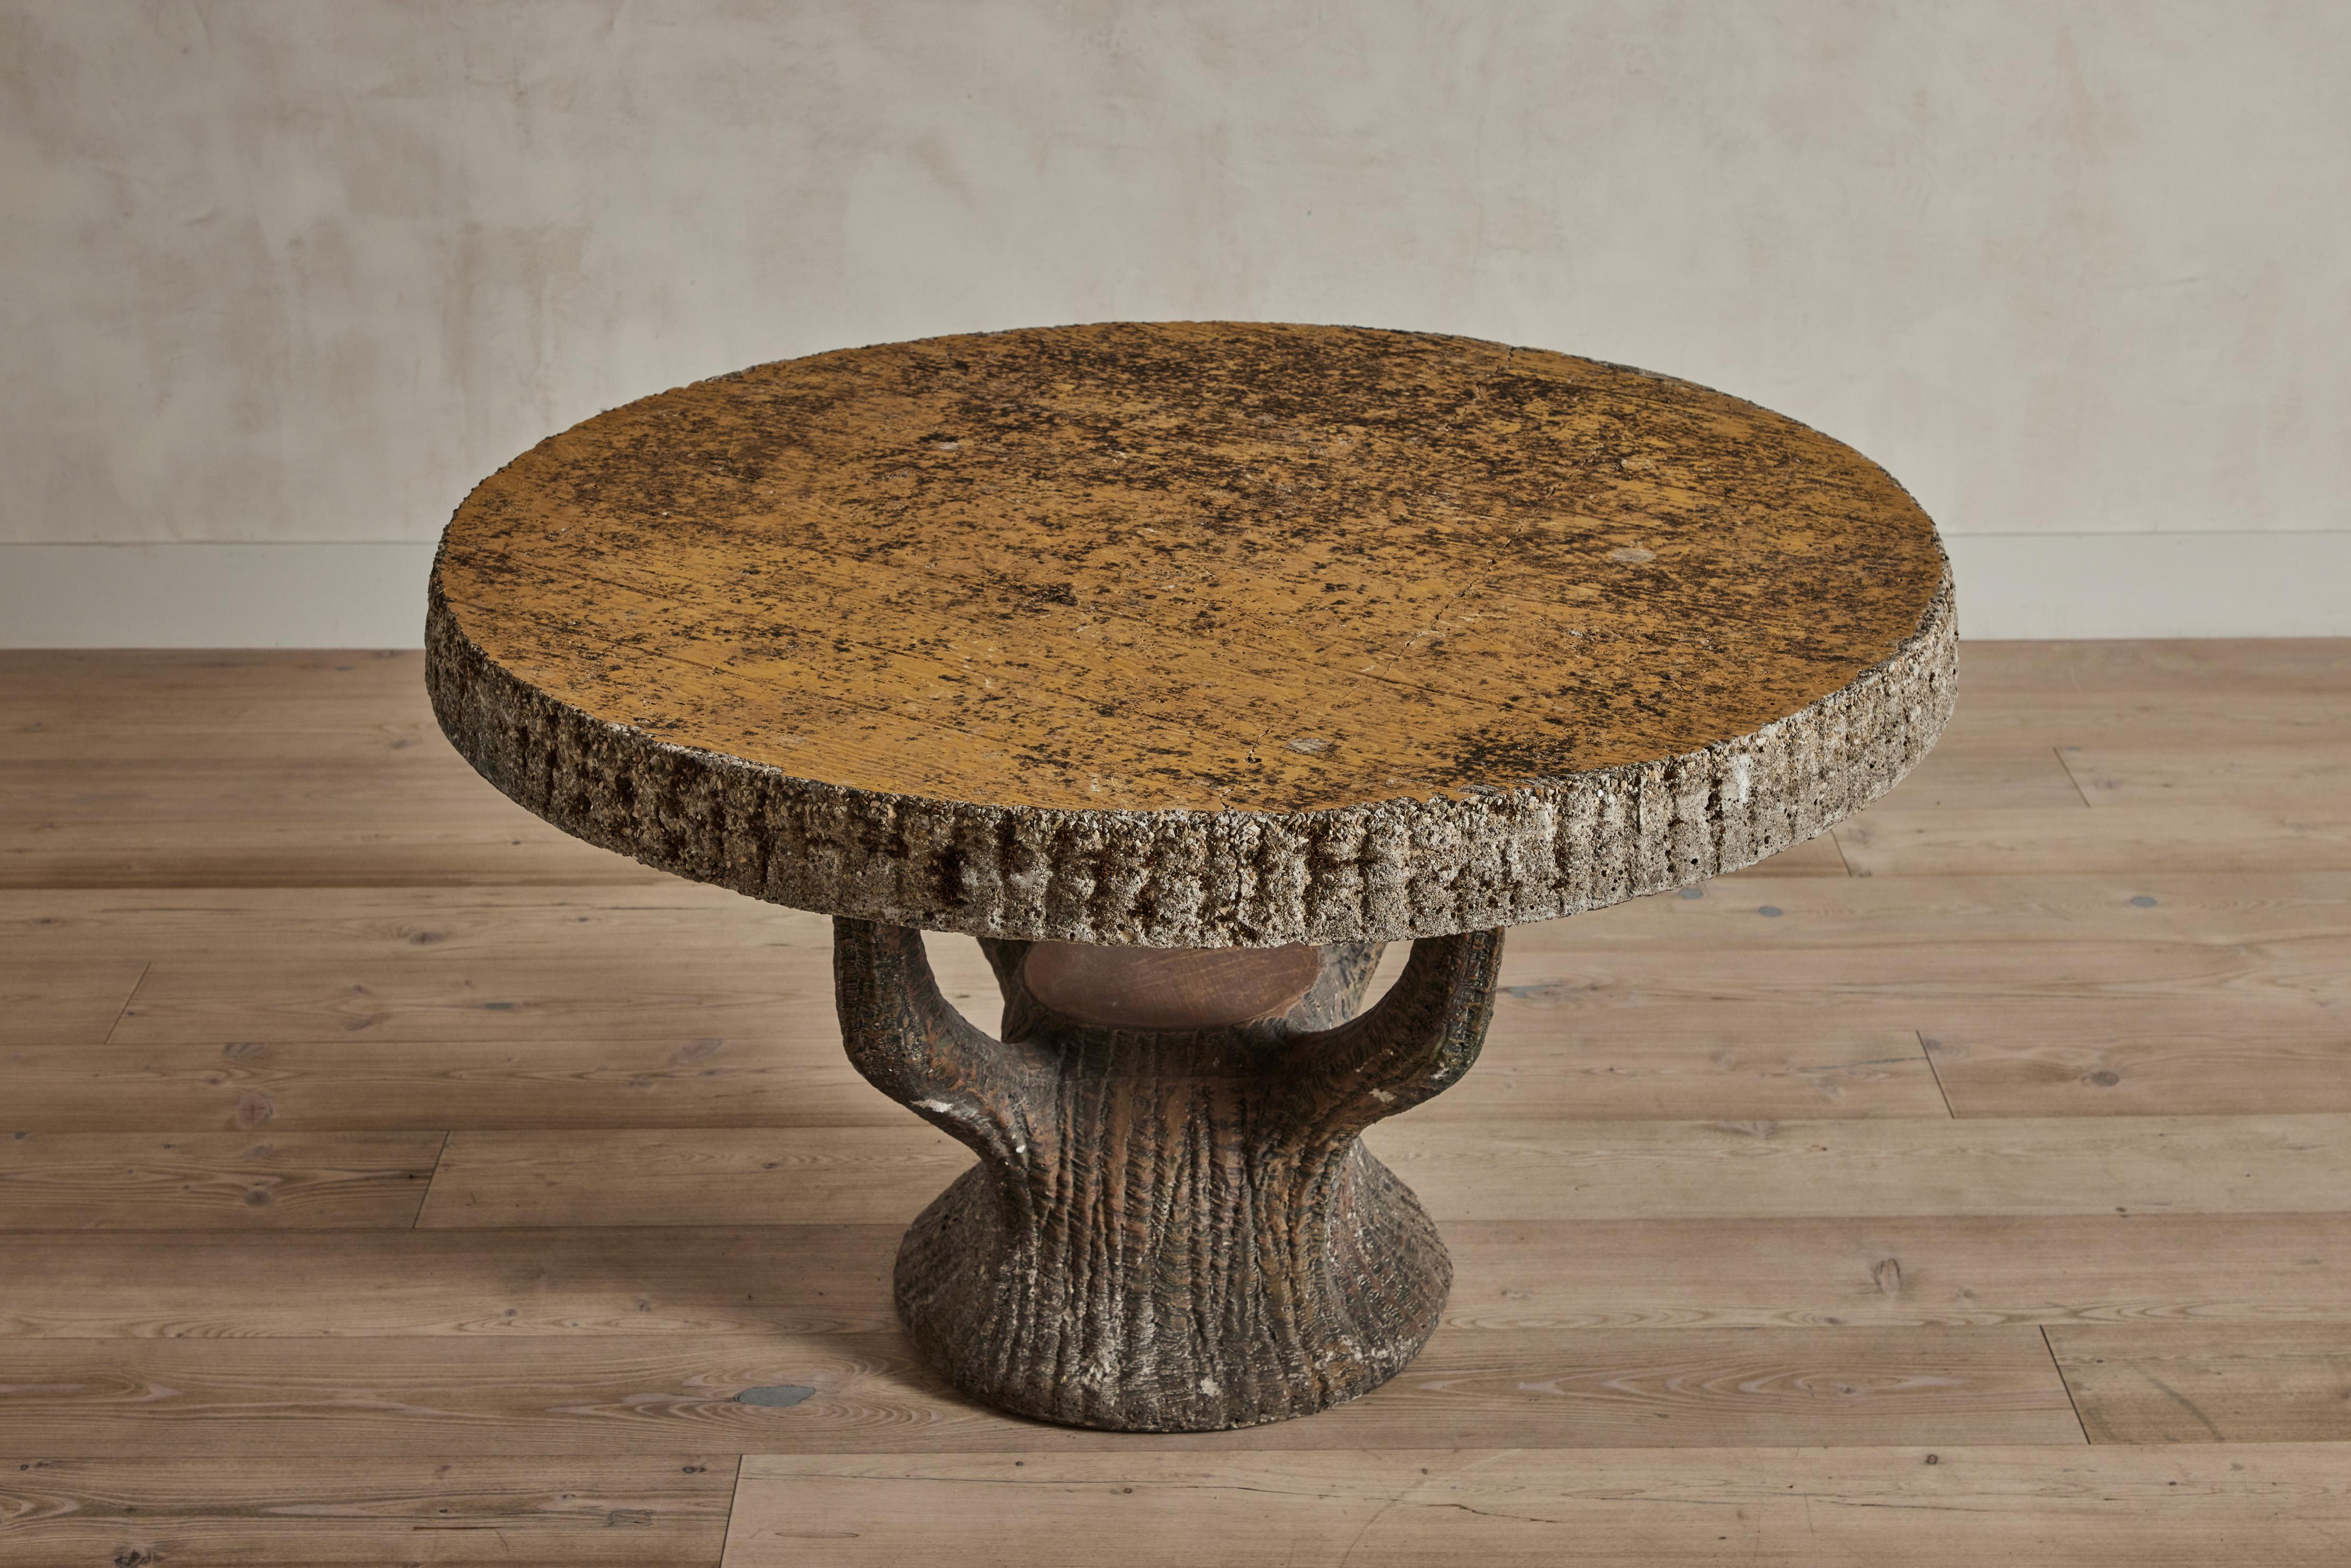 Concrete Faux Bois outdoor table from France circa 1930. Good vintage condition with some visible wear on concrete. Wear is consistent with age and use. 

